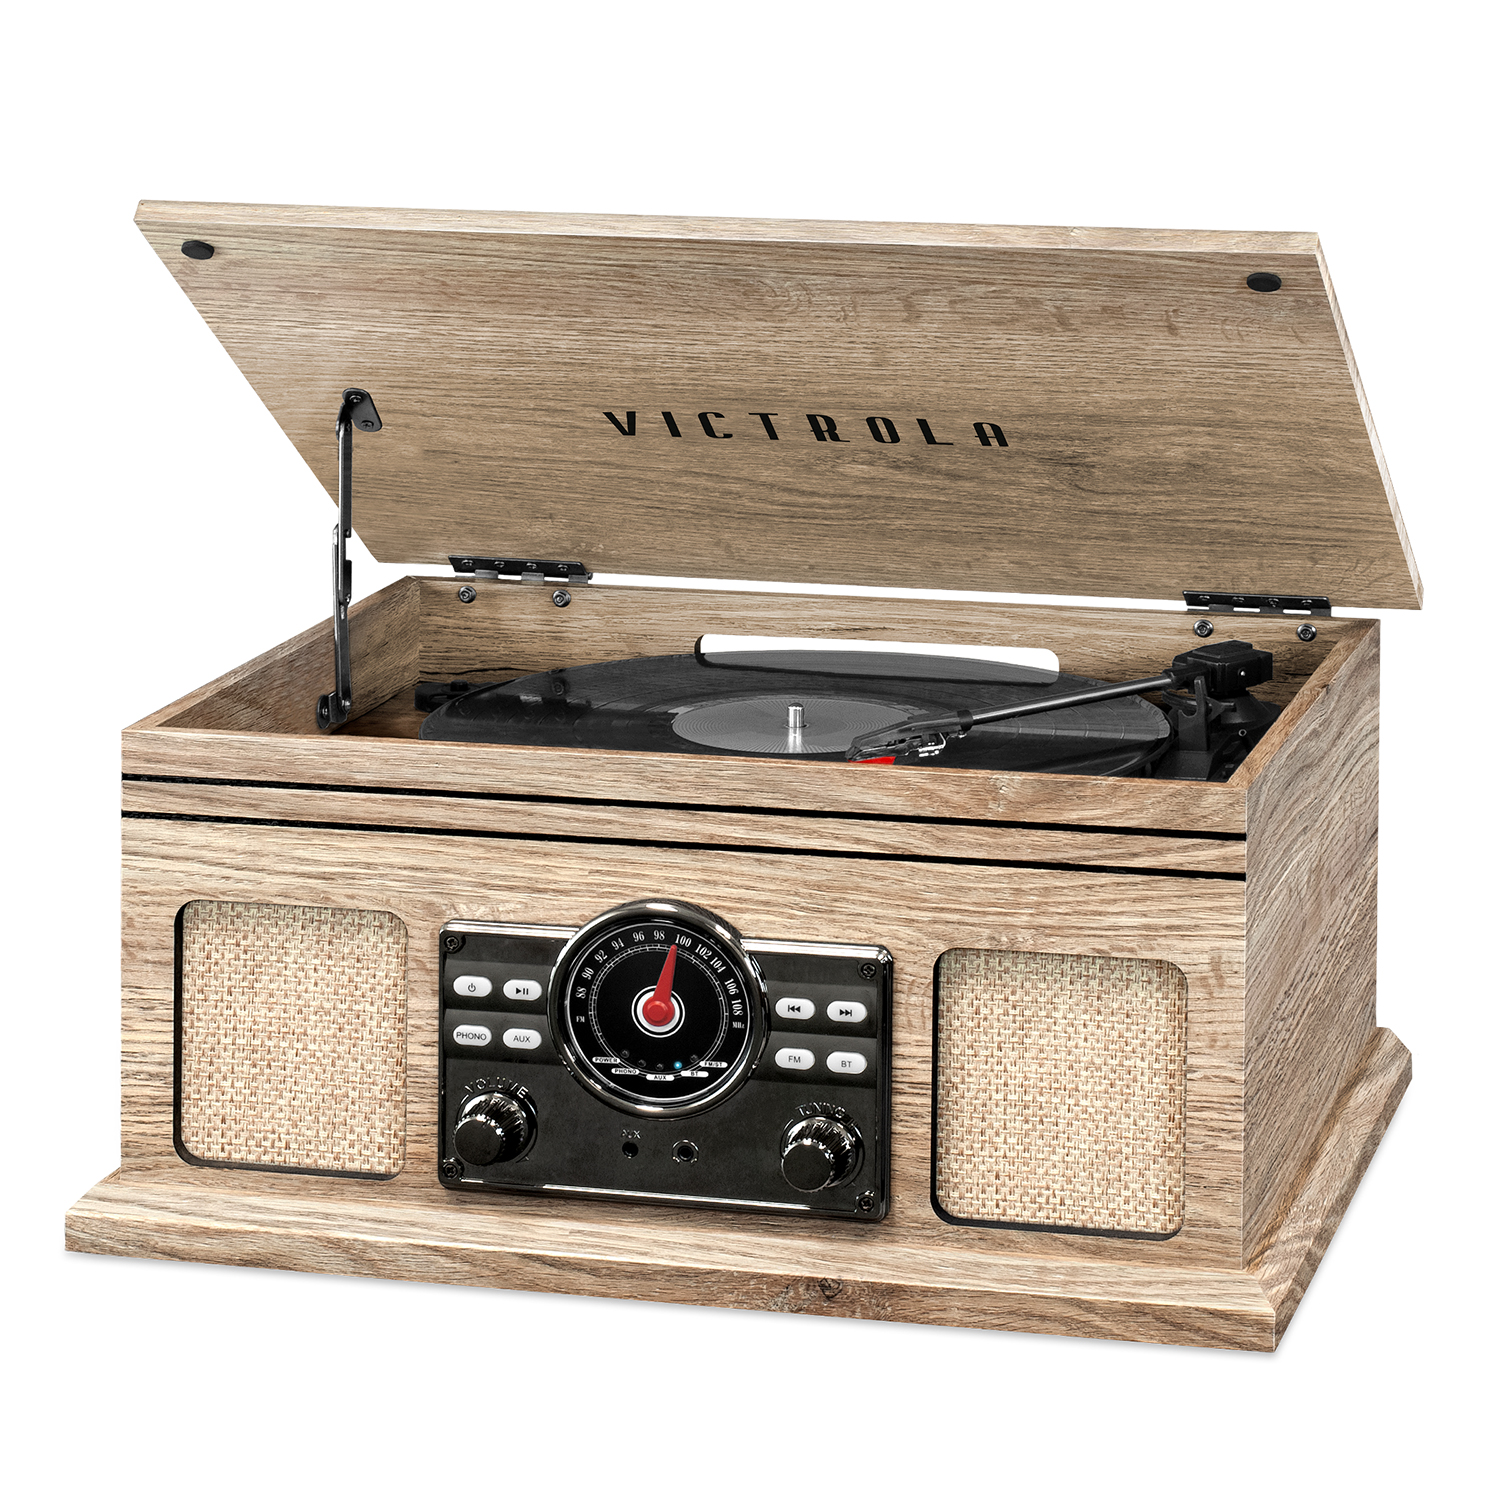 Victrola 4-in-1 Nostalgic Bluetooth Record Player with 3-Speed Record Turntable and FM Radio - Farmhouse Oatmeal - image 1 of 4